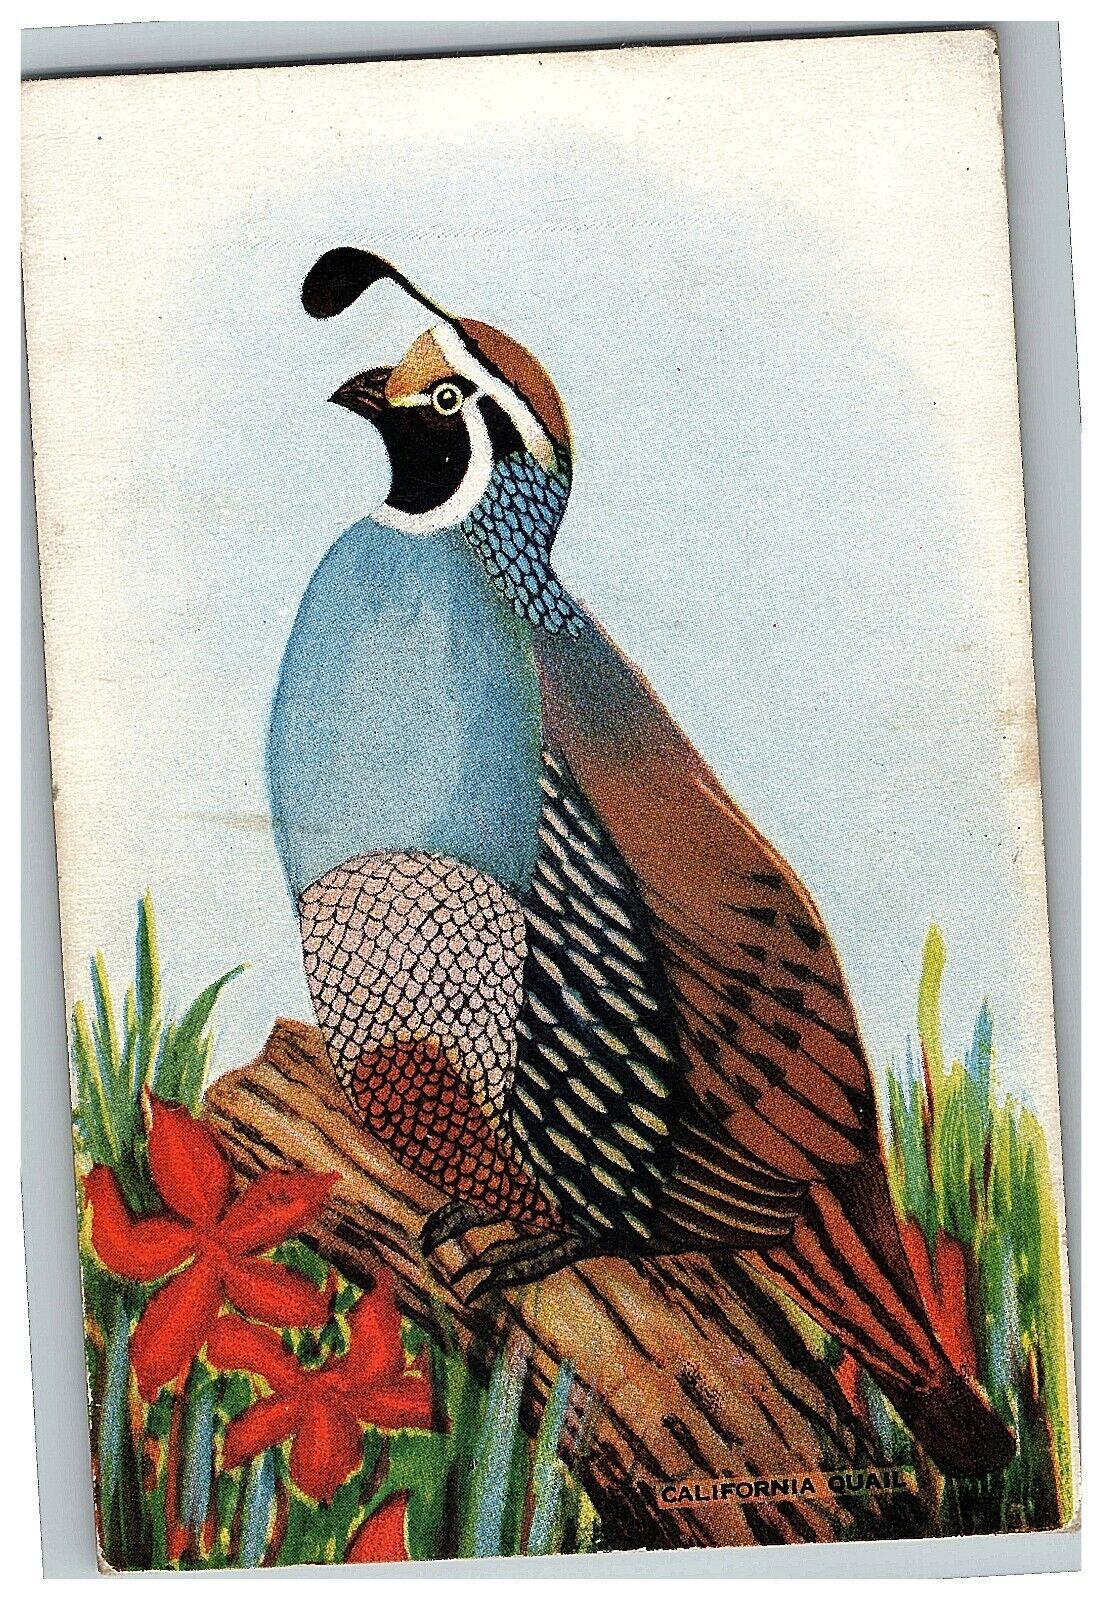 1914-19 California Quail Conservative Life Ins. Co Of America South Bend IN Card